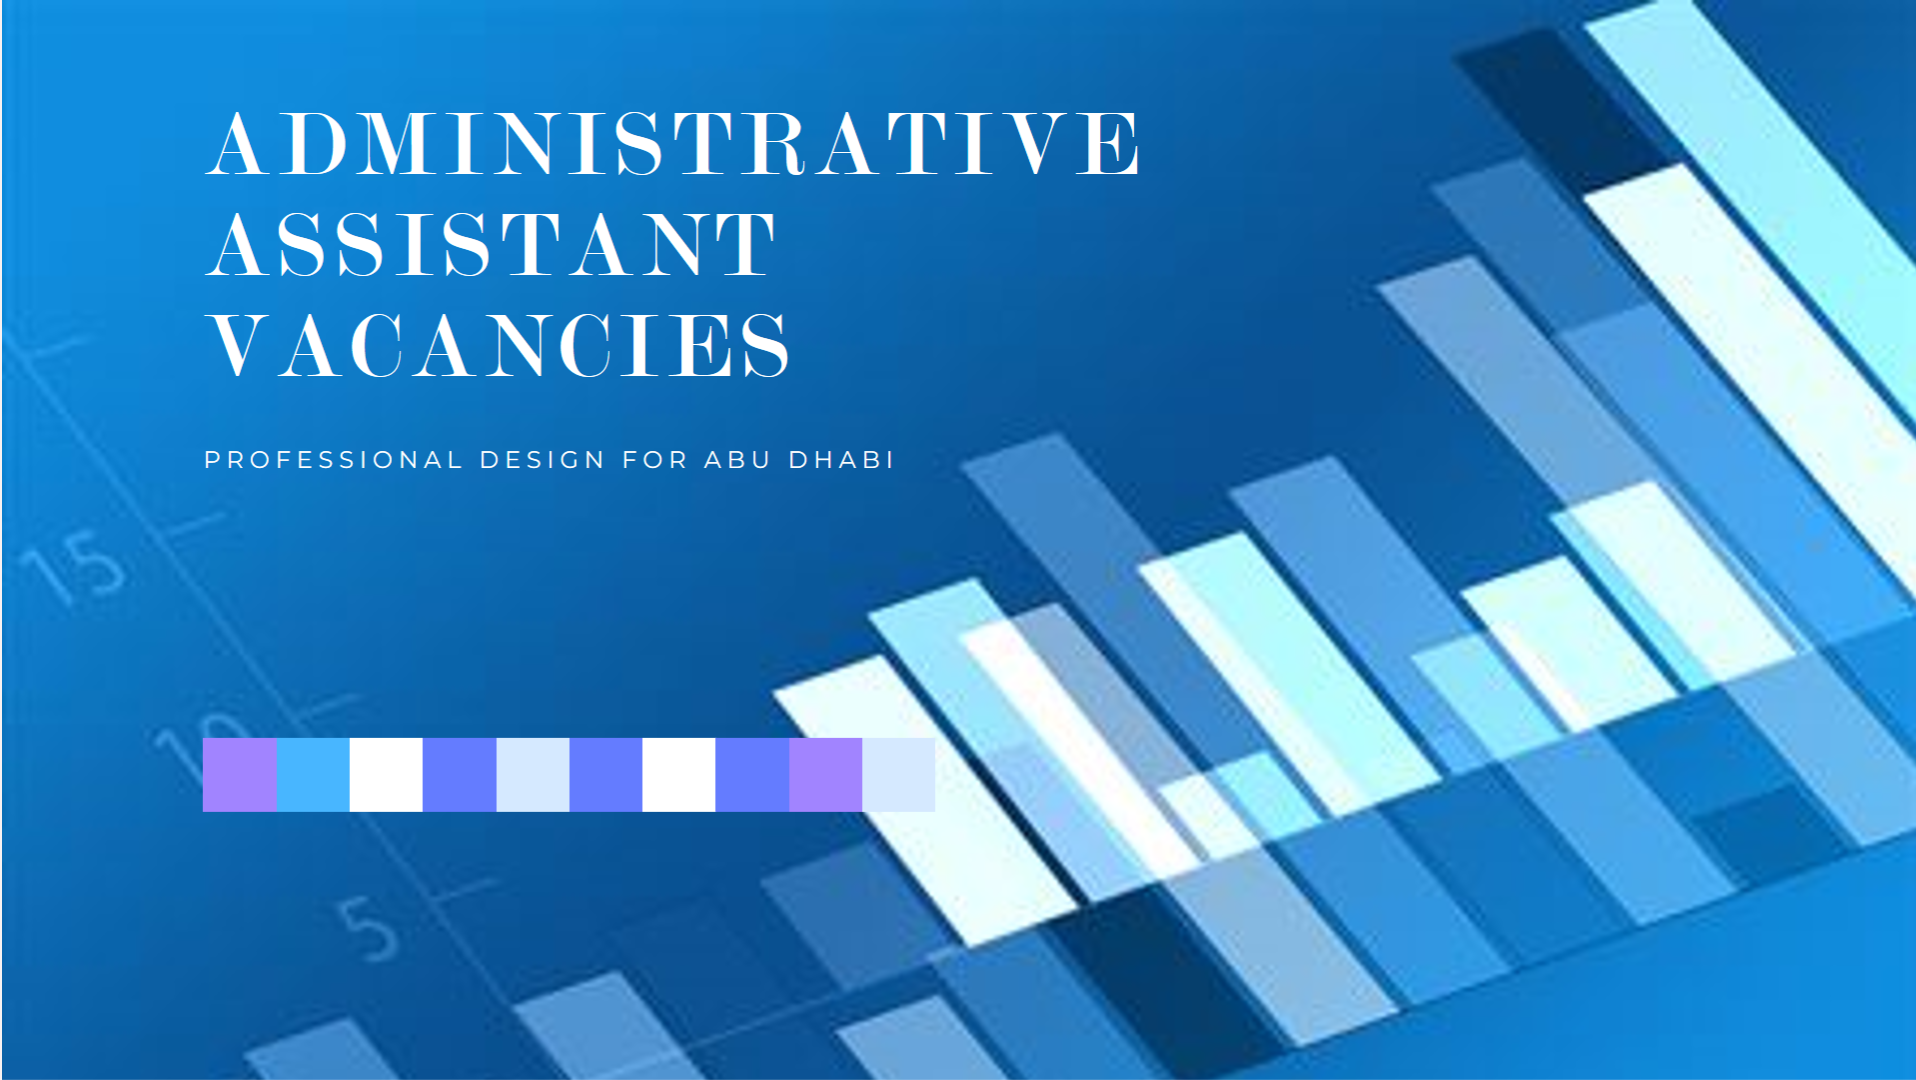 Administrative Assistant vacancies in Abu Dhabi today